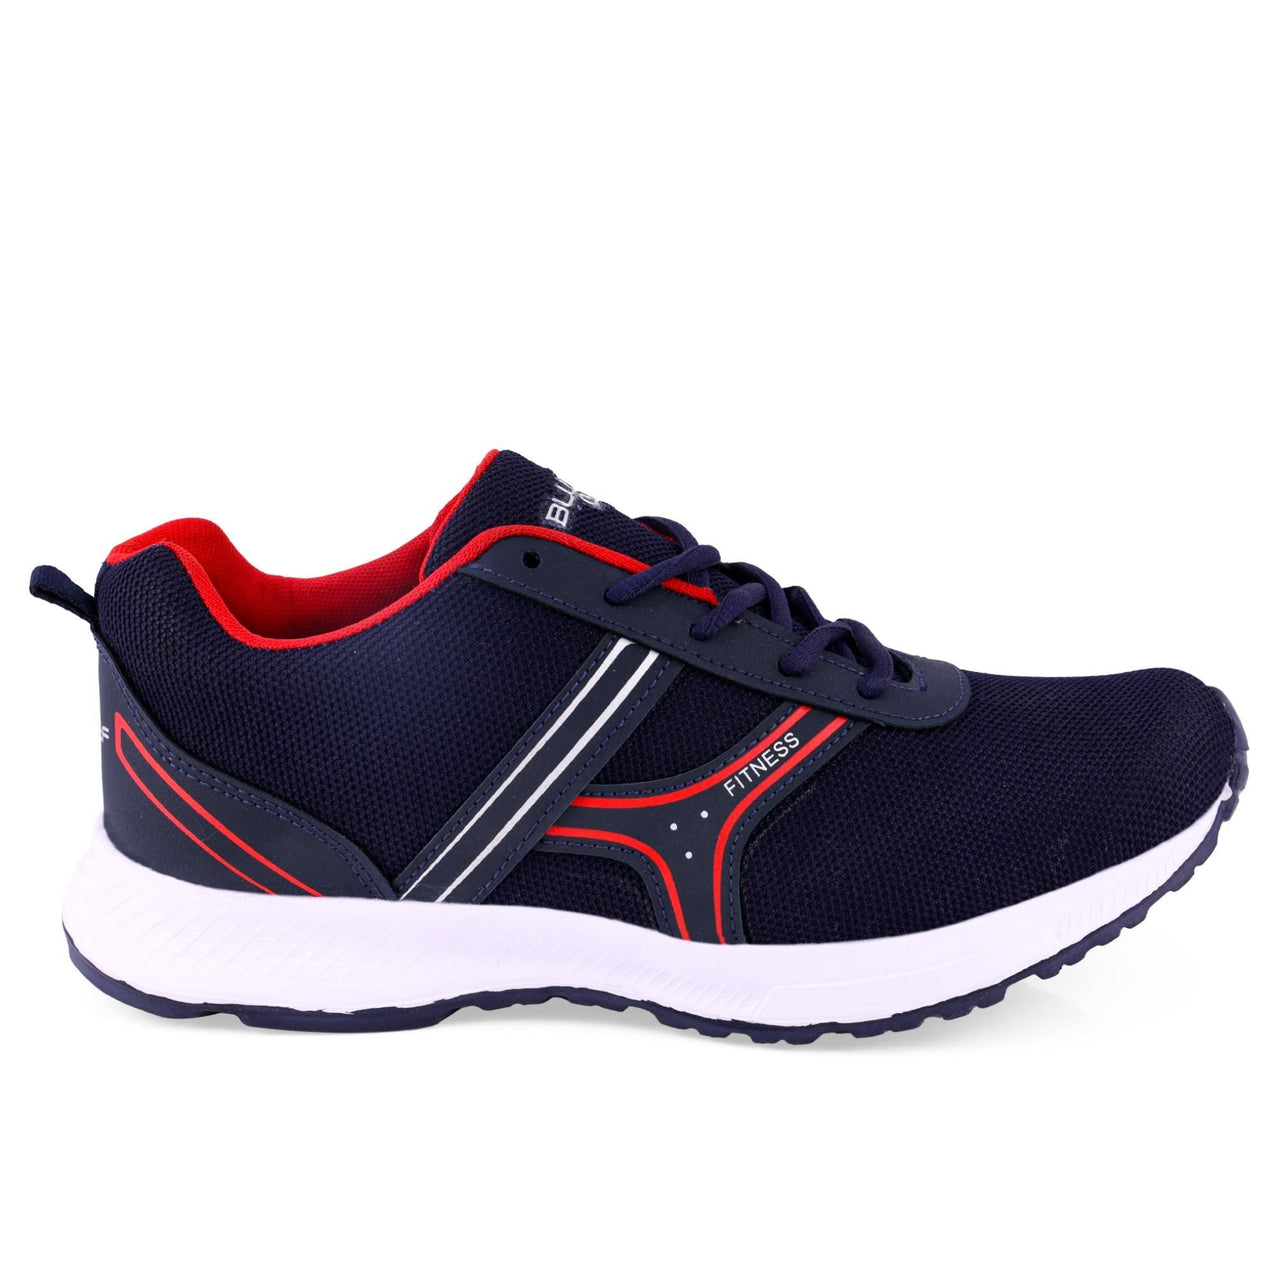 Men's Casual Lace-up Sports Shoes for Running and Walking